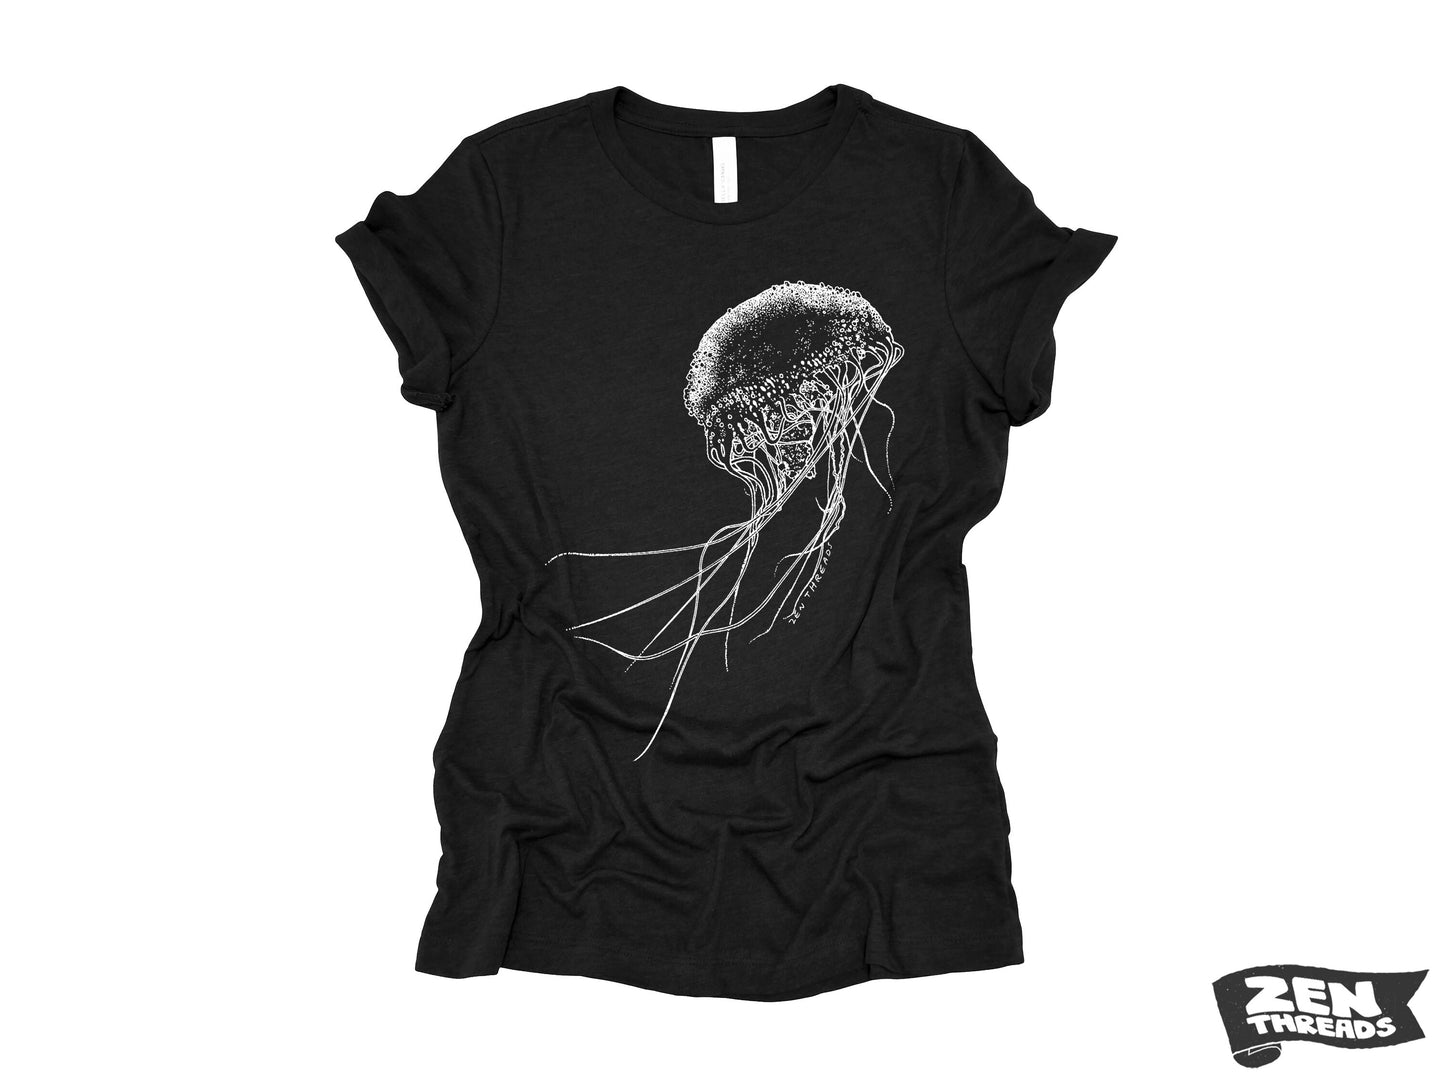 Womens JELLYFISH printed tee t-shirt (+ Colors Available) custom Bella Canvas relaxed fit ladies shirt squid ocean graphic jelly fish beach